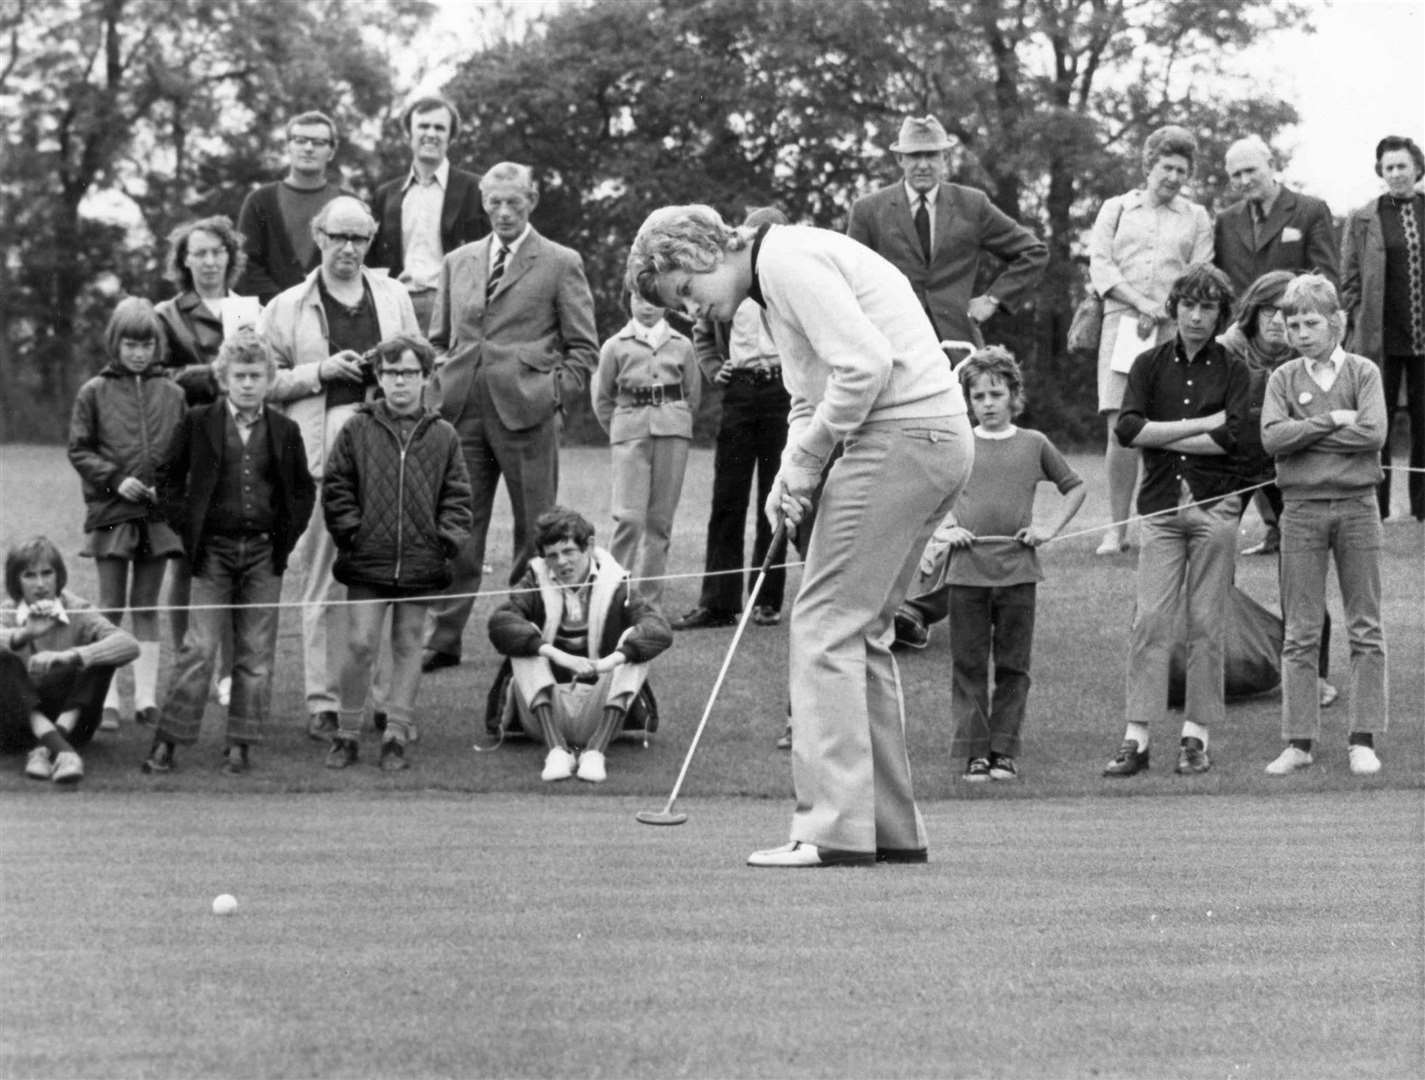 Chatham's Mickey Walker became one of the leading woman golfers in Britain while still a teenager in the early 1970s. She was the youngest player in this century to win the English Ladies' Open Championship